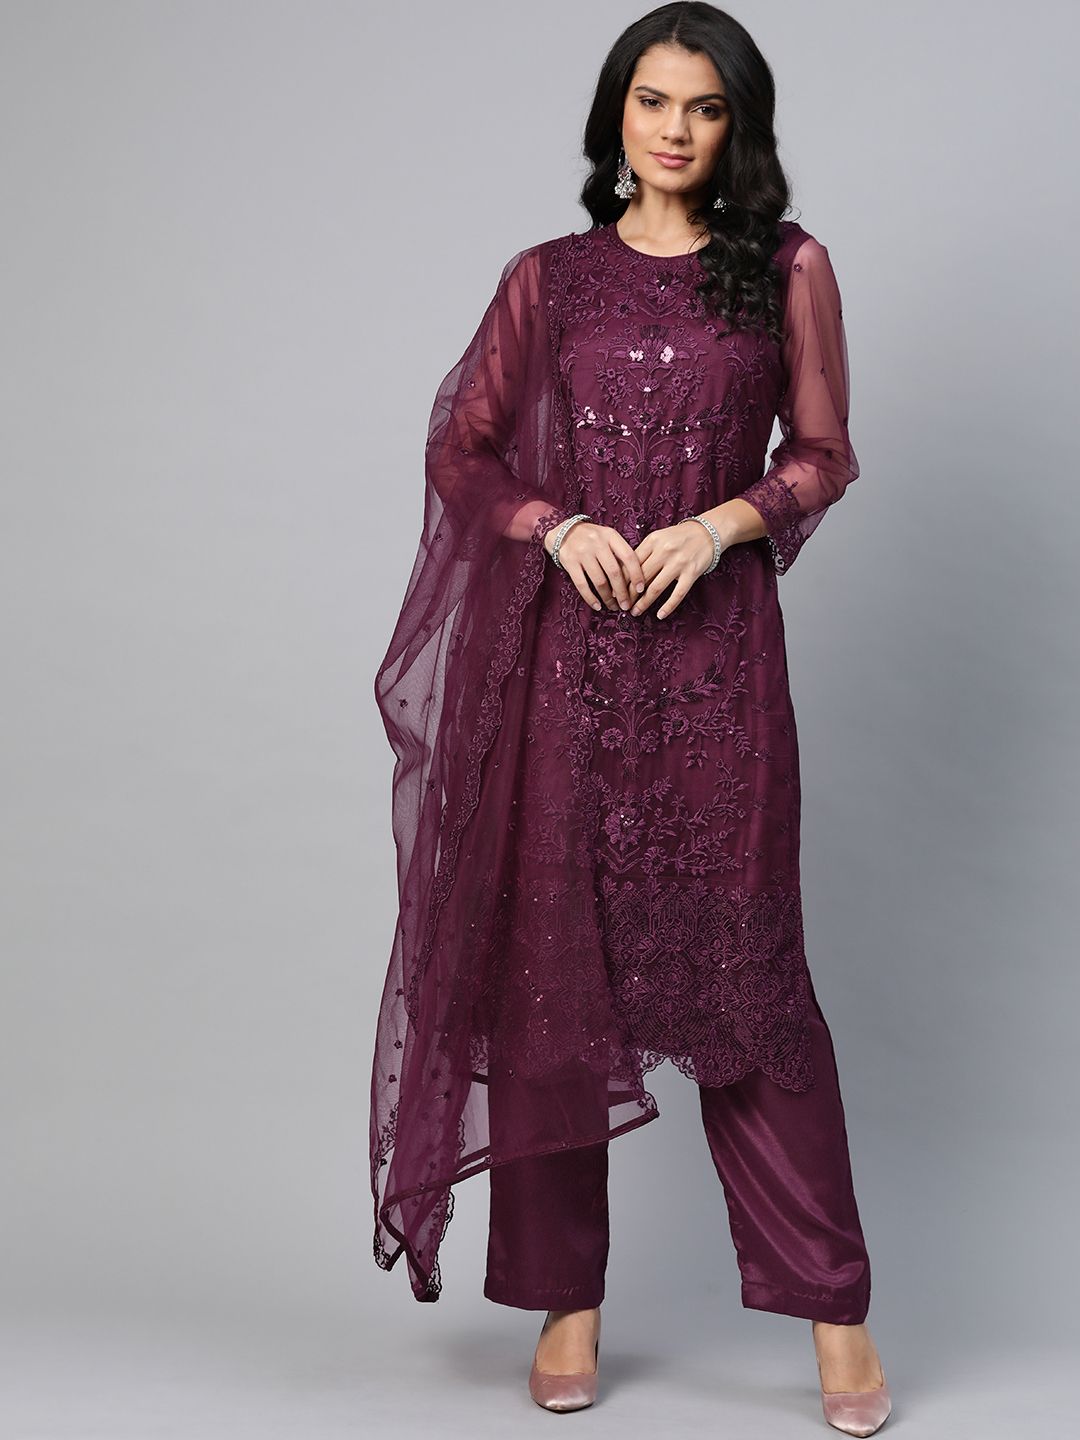 Readiprint Fashions Burgundy Embroidered Unstitched Dress Material Price in India